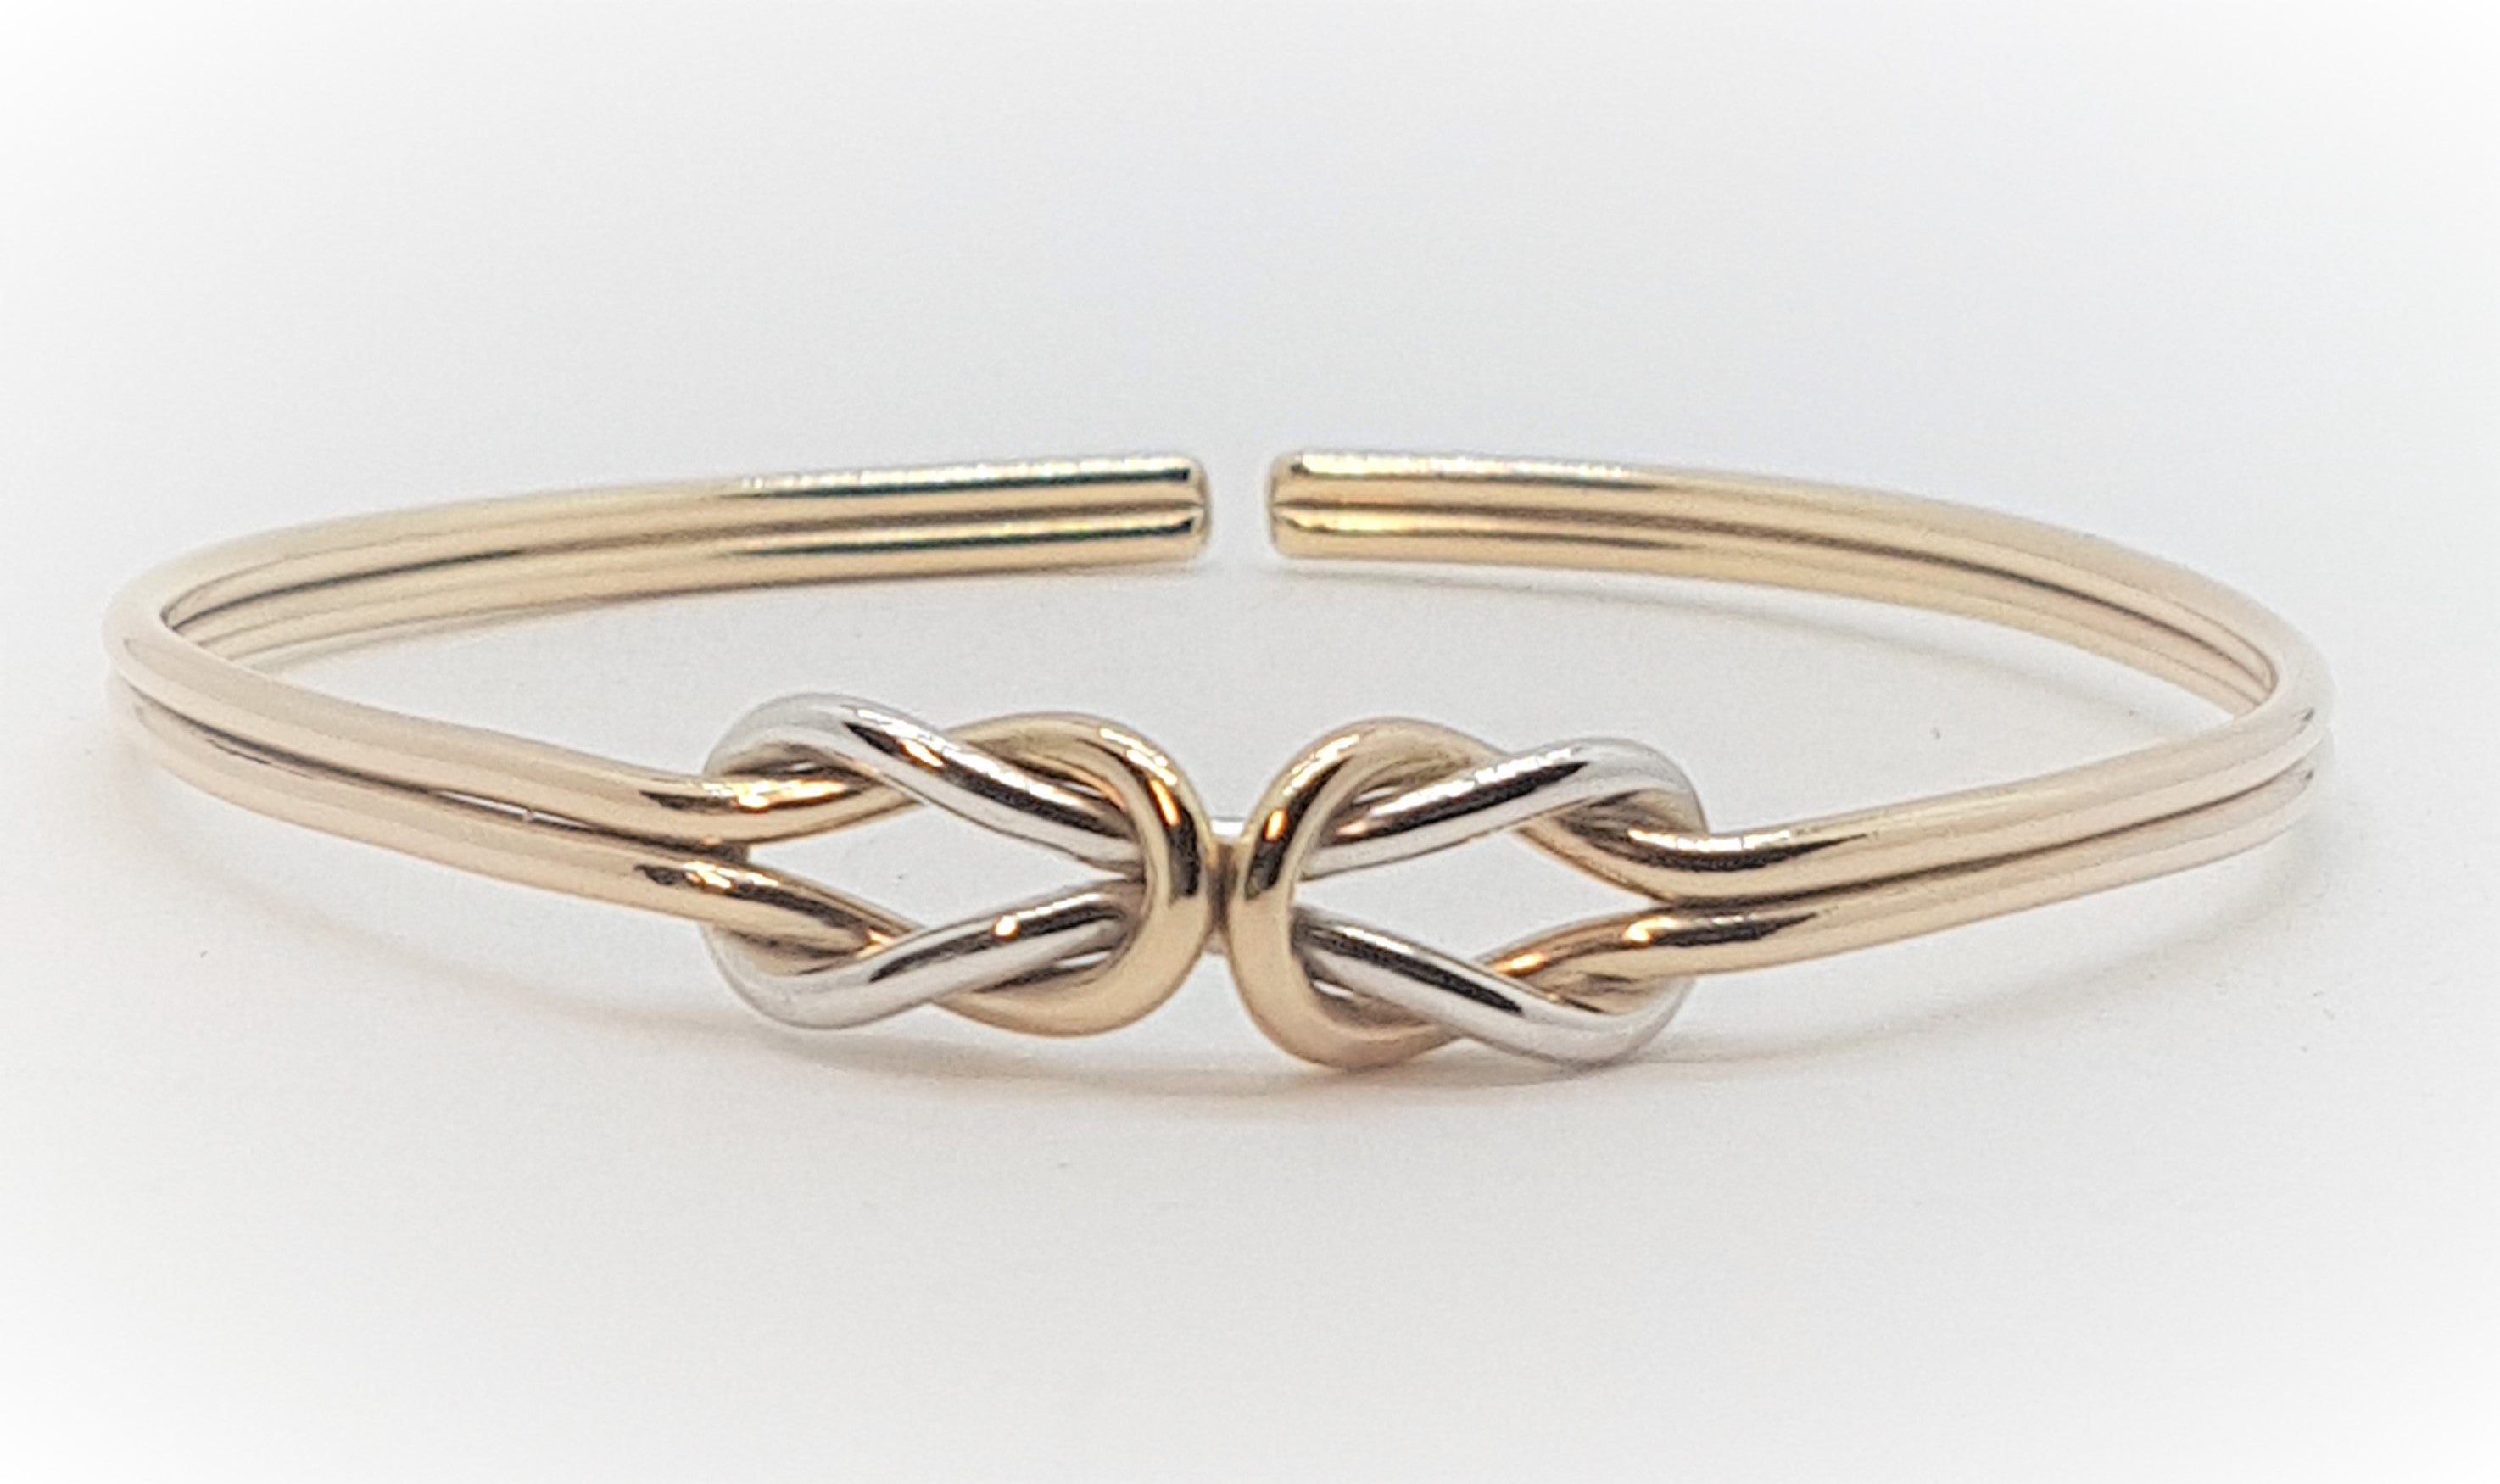 Gold and Silver Double Reef Knot Bangle